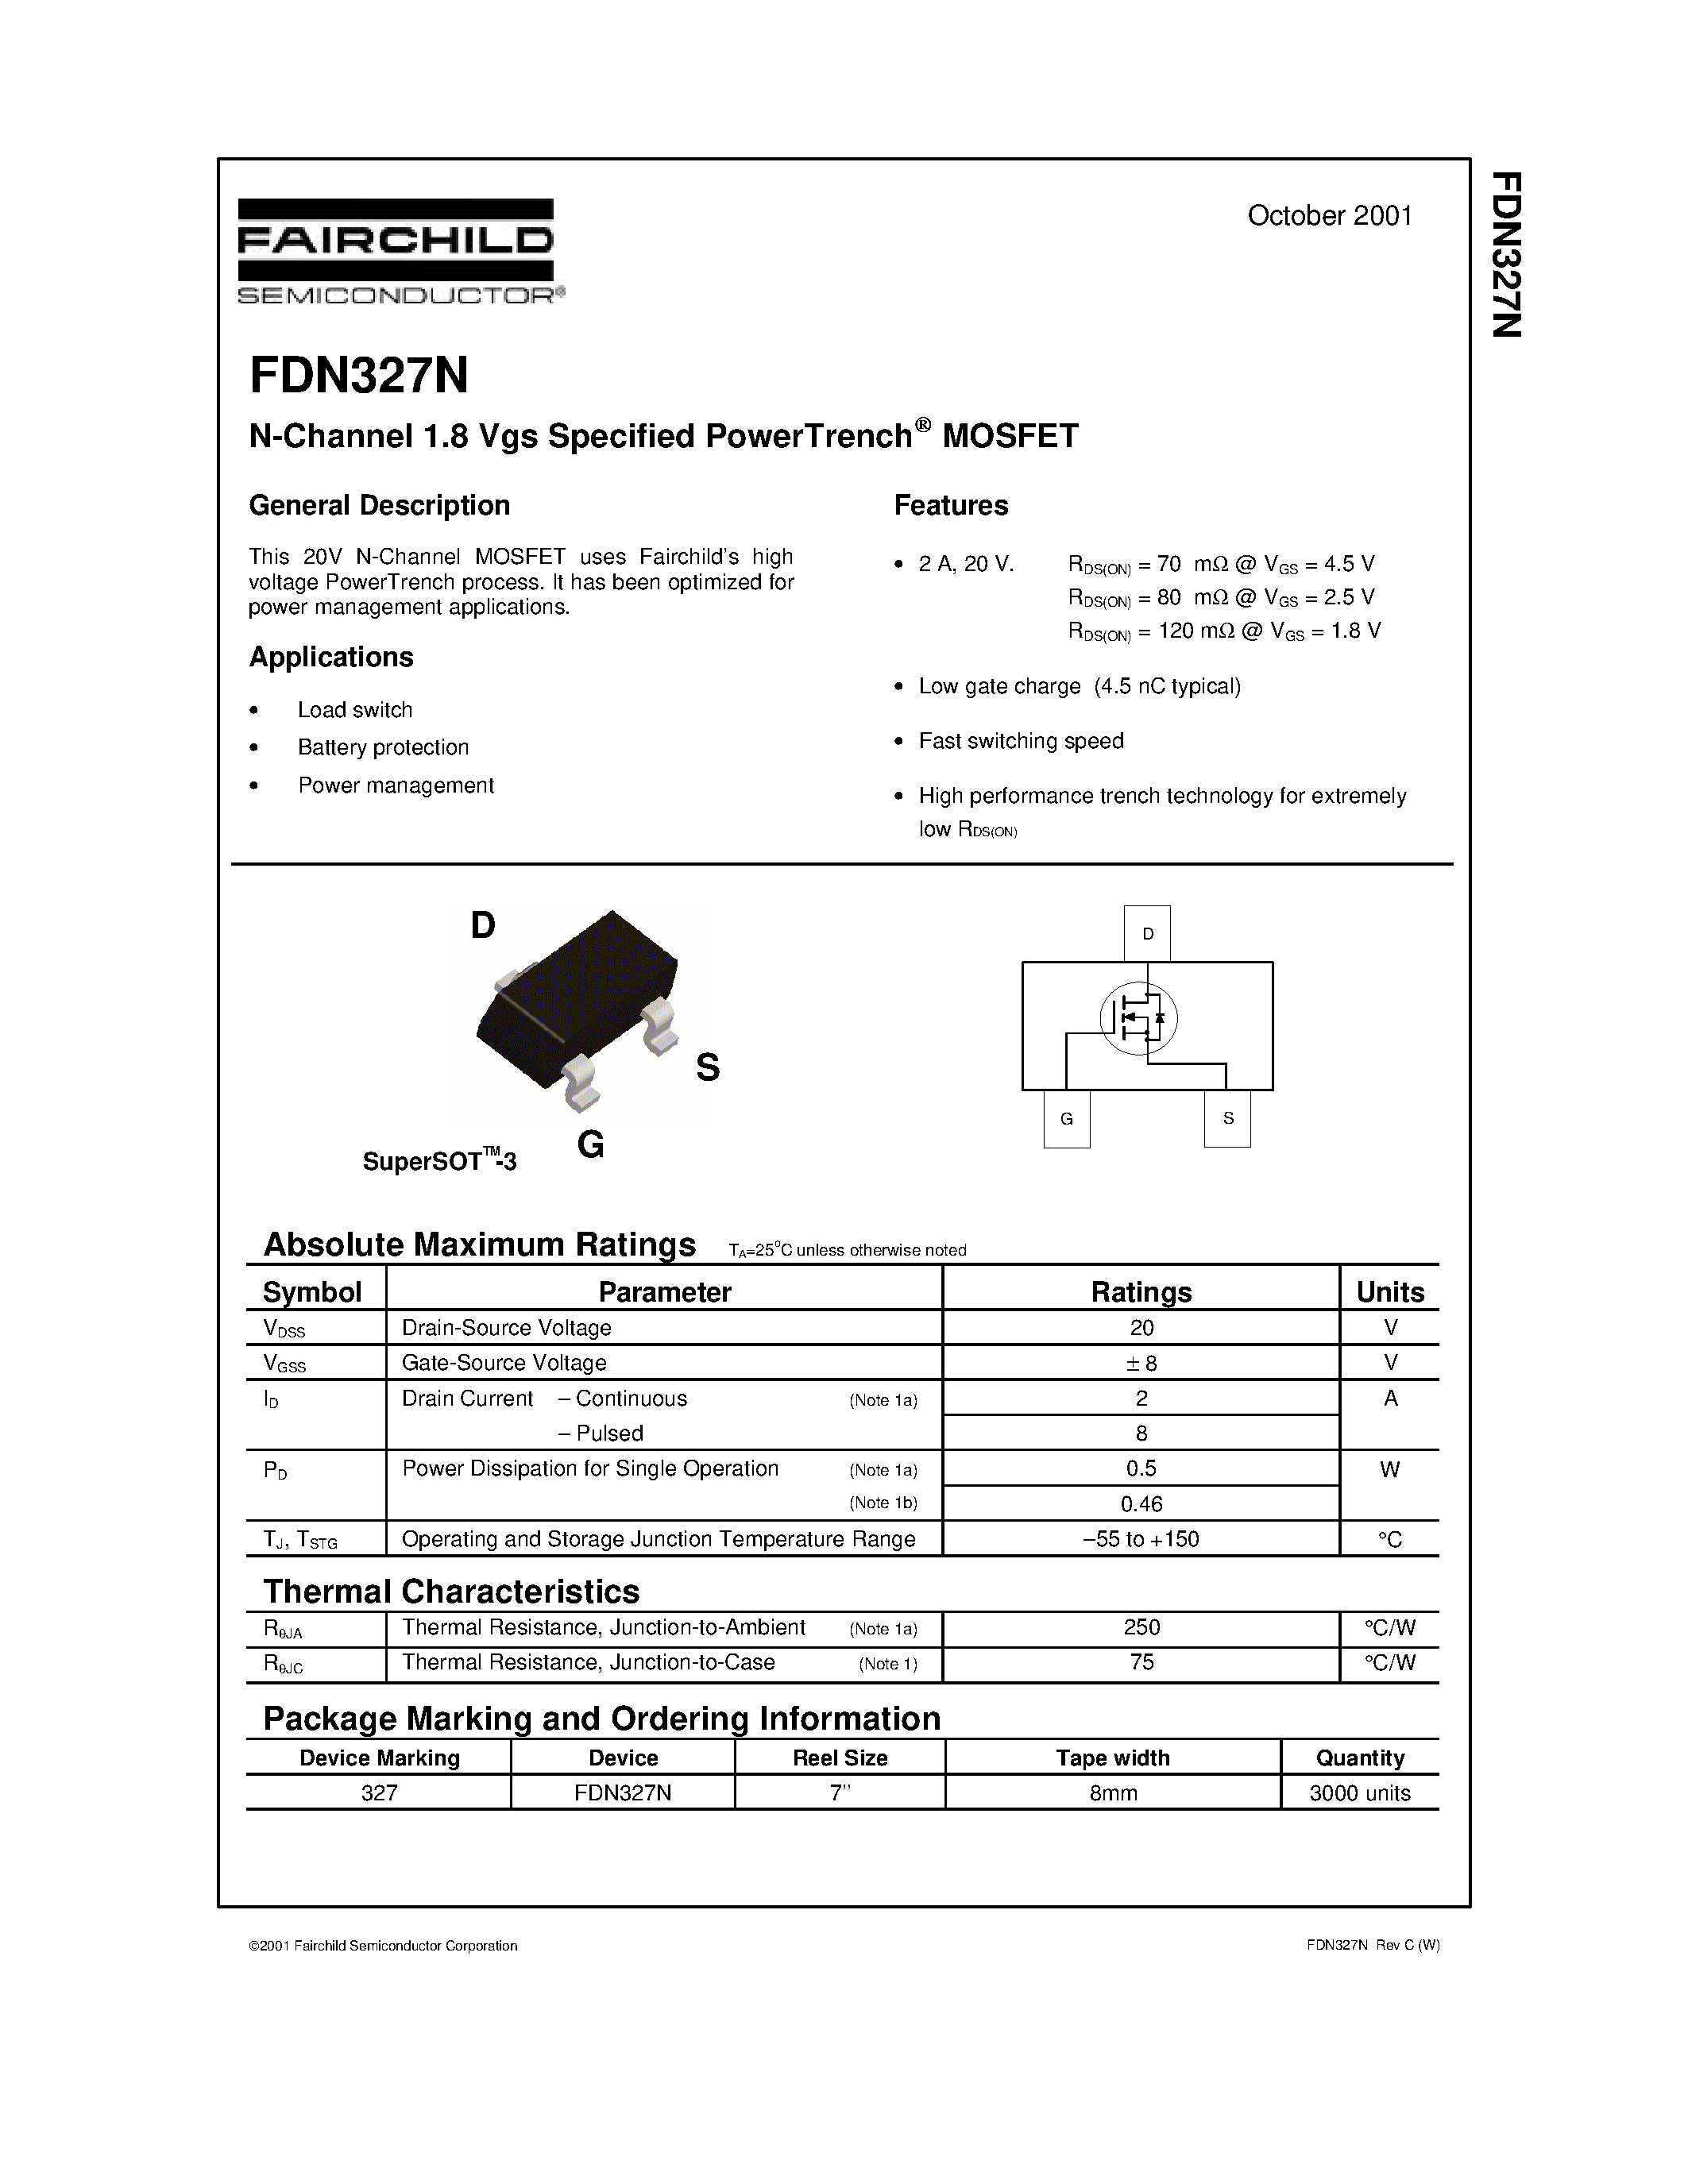 Даташит FDN327N - N-Channel 1.8 Vgs Specified PowerTrench MOSFET страница 1